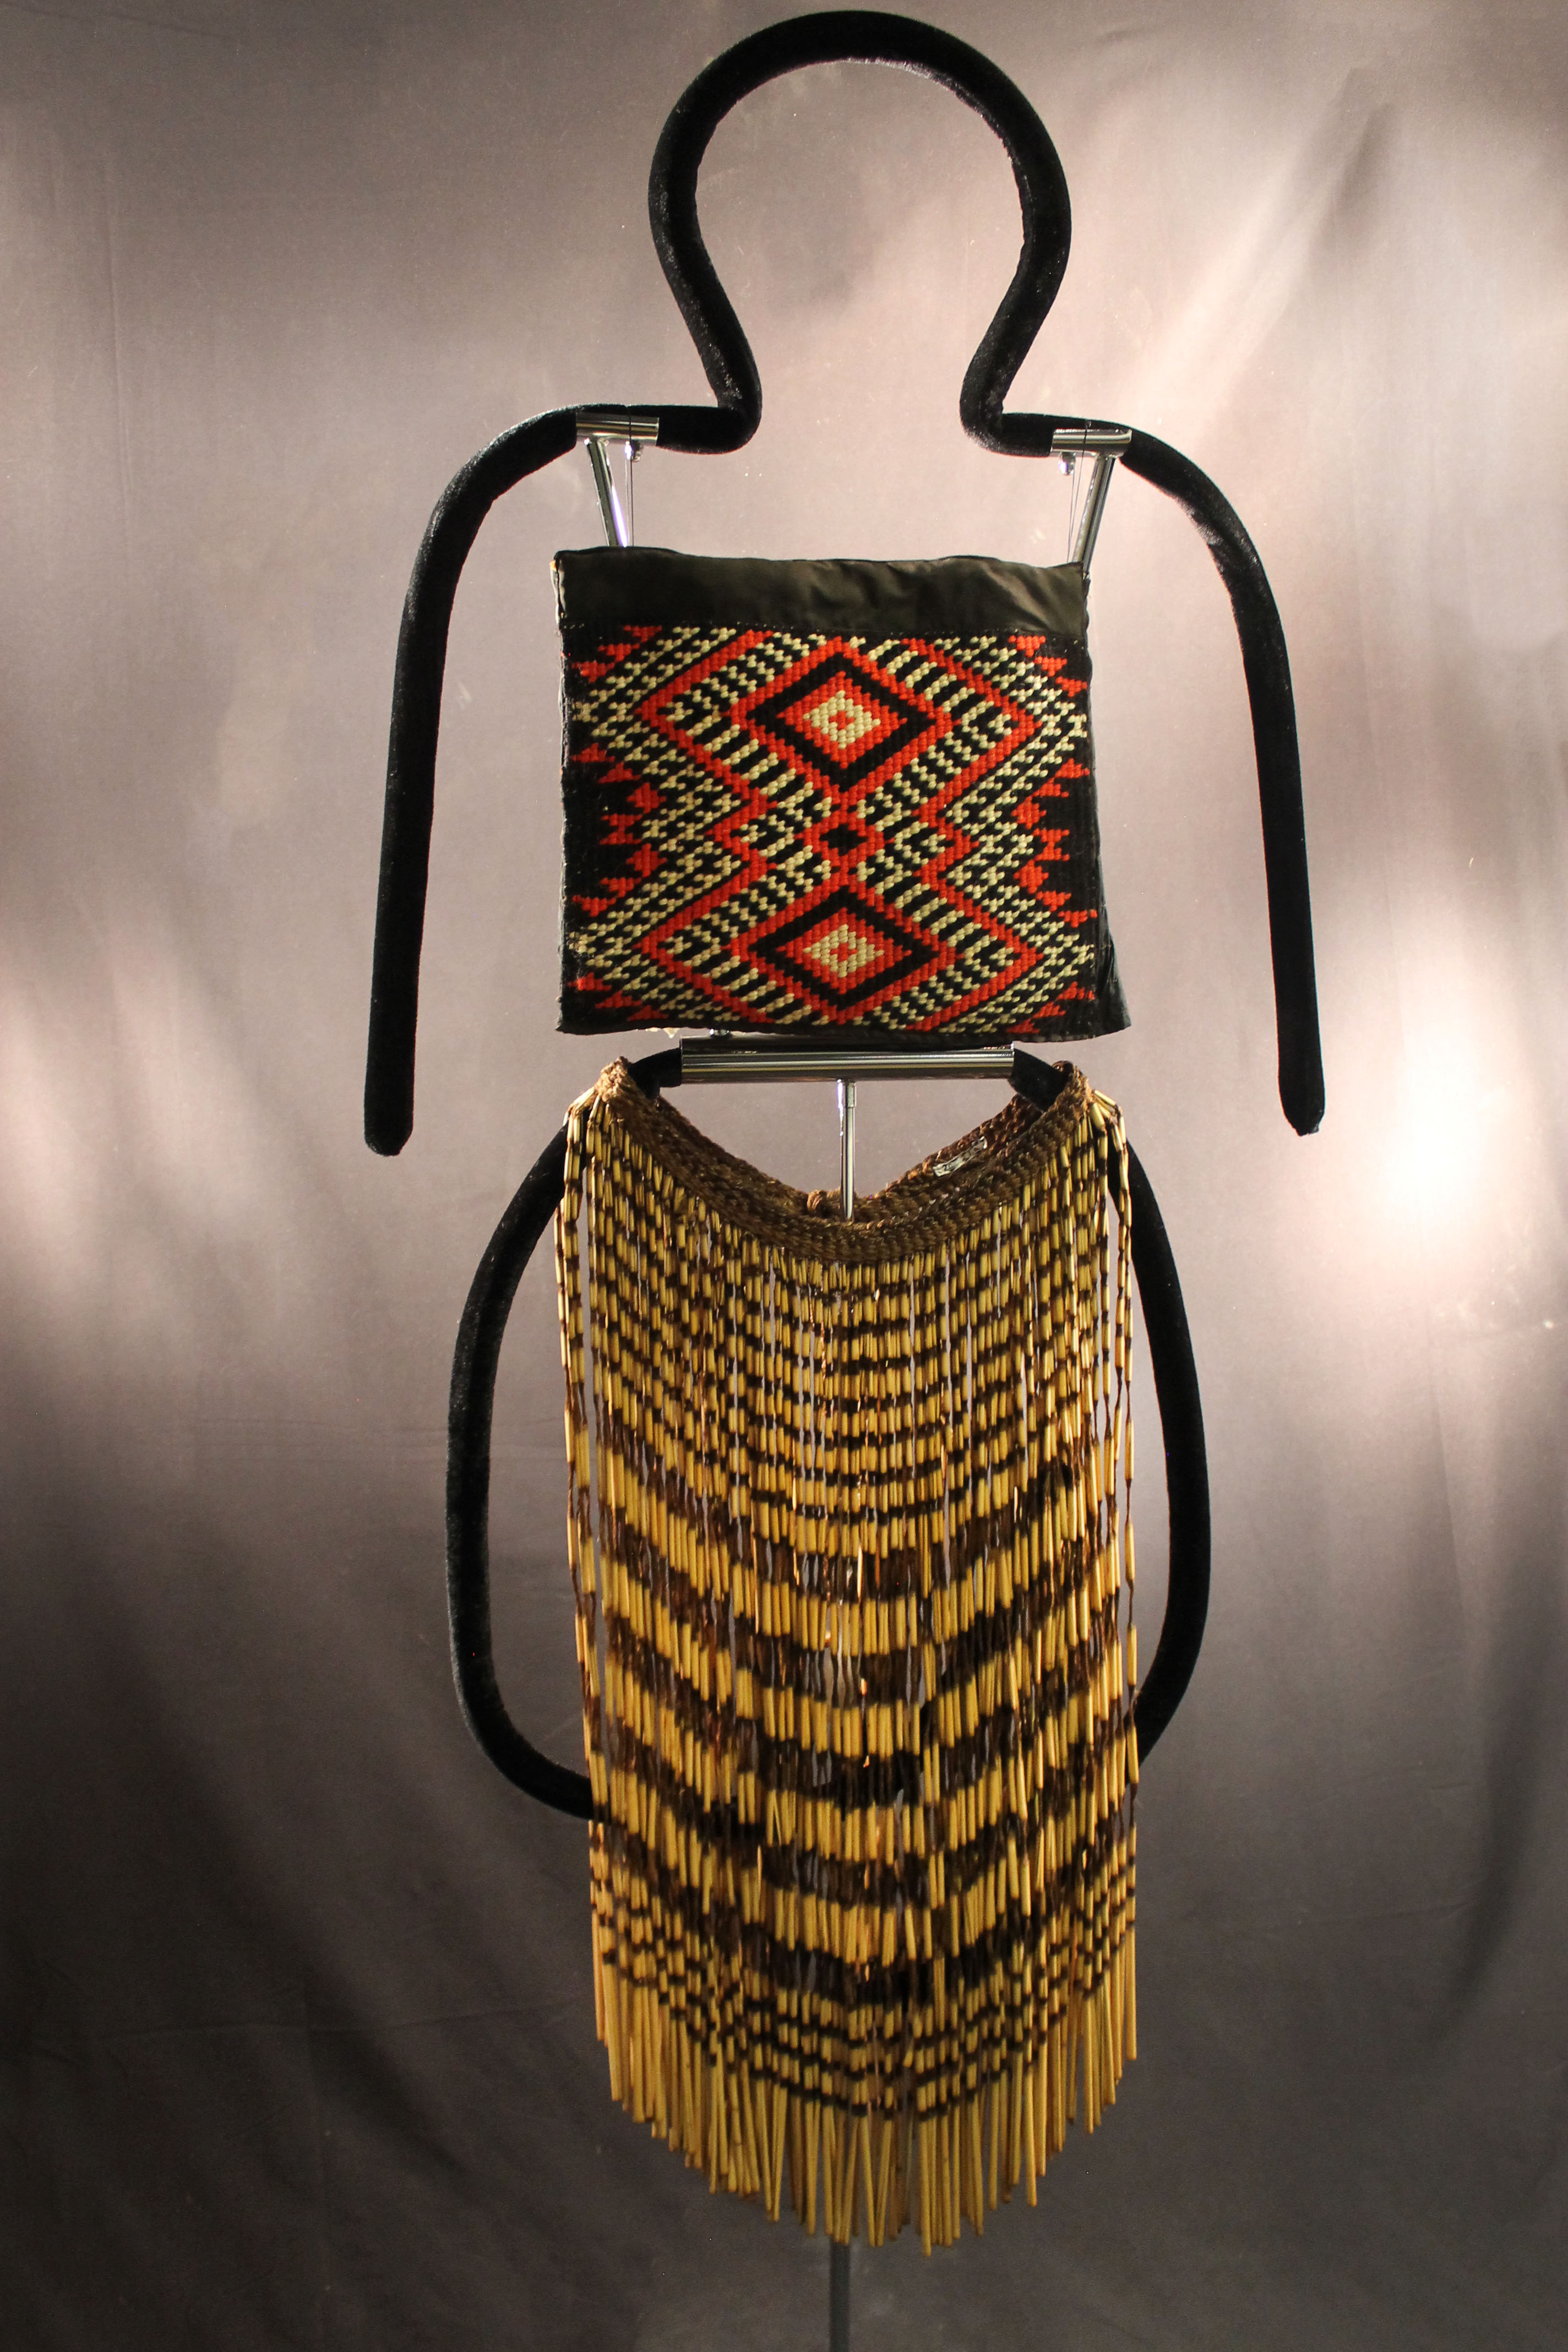 The costume is made up of a top made up of thick fabric with black, white, and red geometric square design. The skirt is tan and brown with reeds held together at the top with braiding.